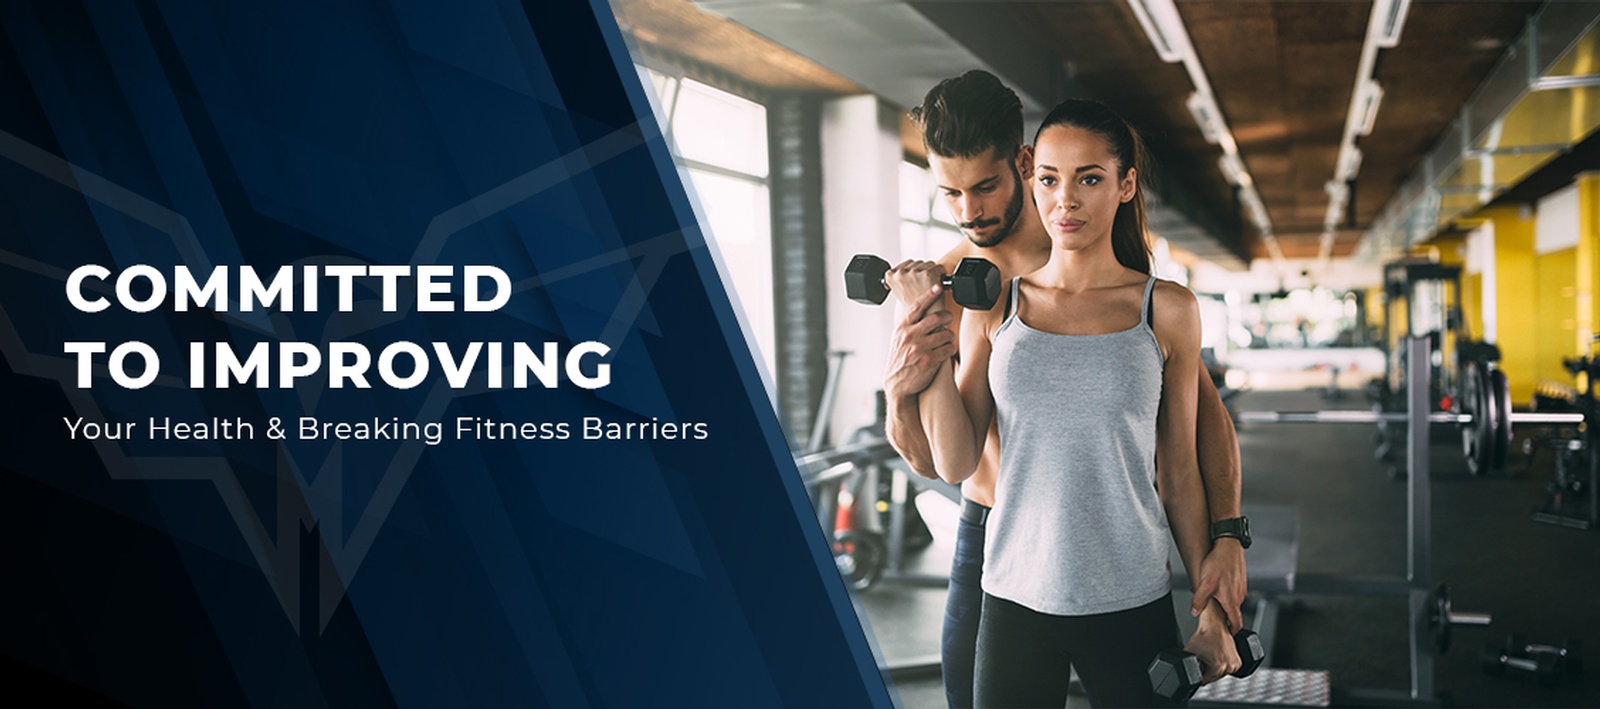 Committed to Improving Your Health - Personal Fitness Training Calgary by EMF Fitness